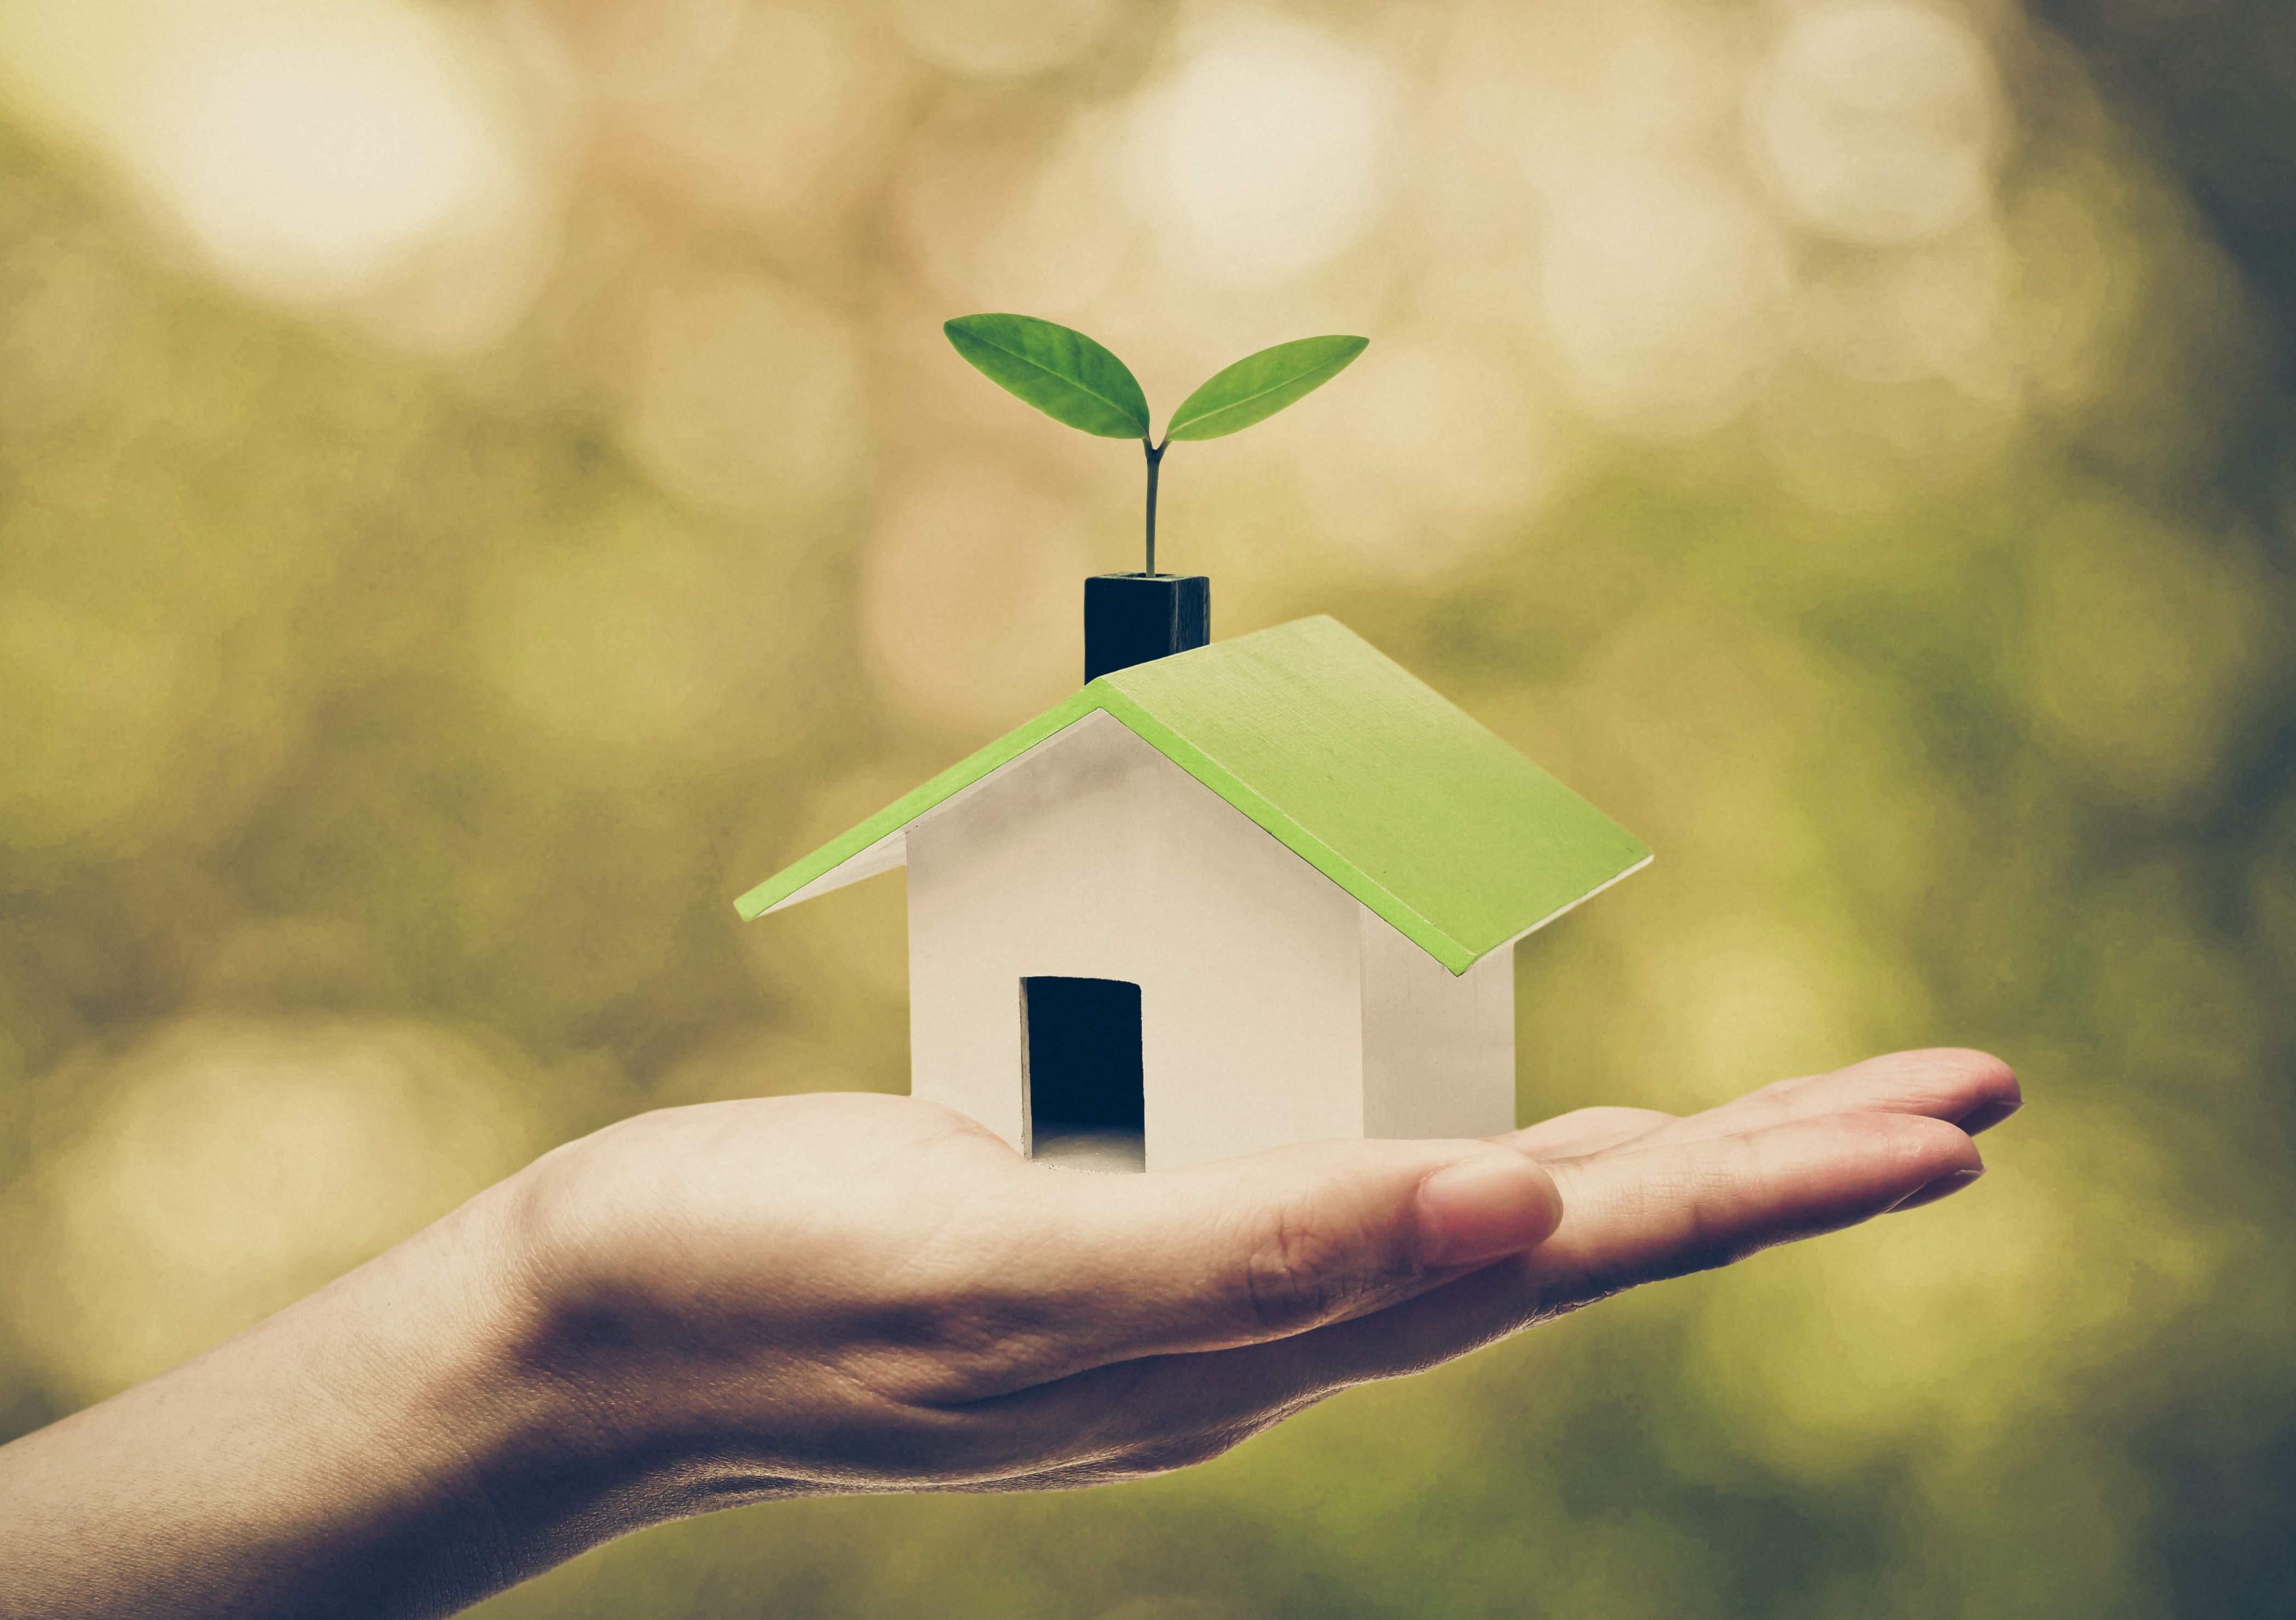 A person holding a small house in their hand with a plant inside.